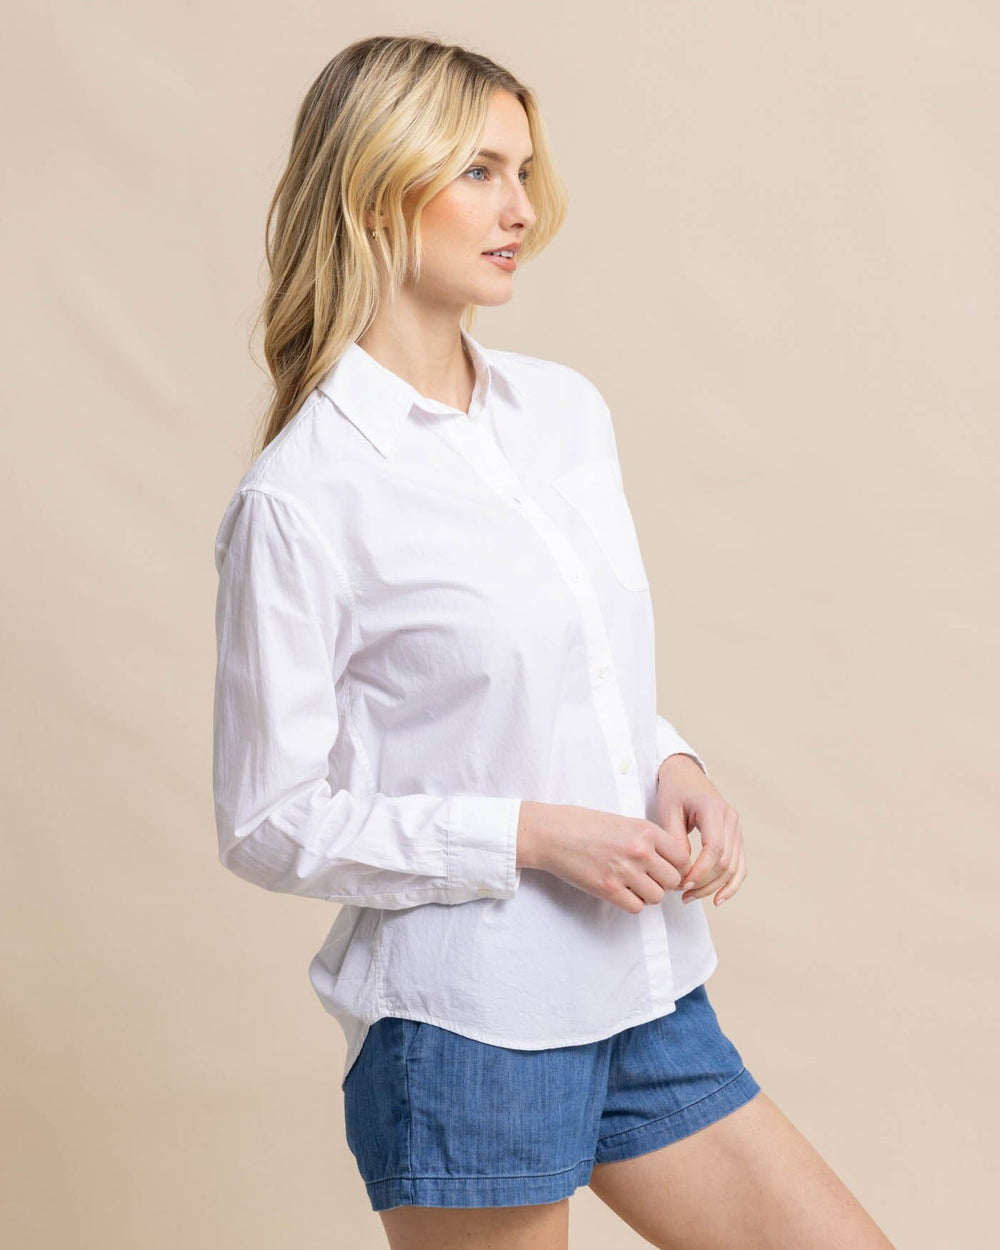 The detail view of the Southern Tide Katherine Poplin Shirt by Southern Tide - Classic White